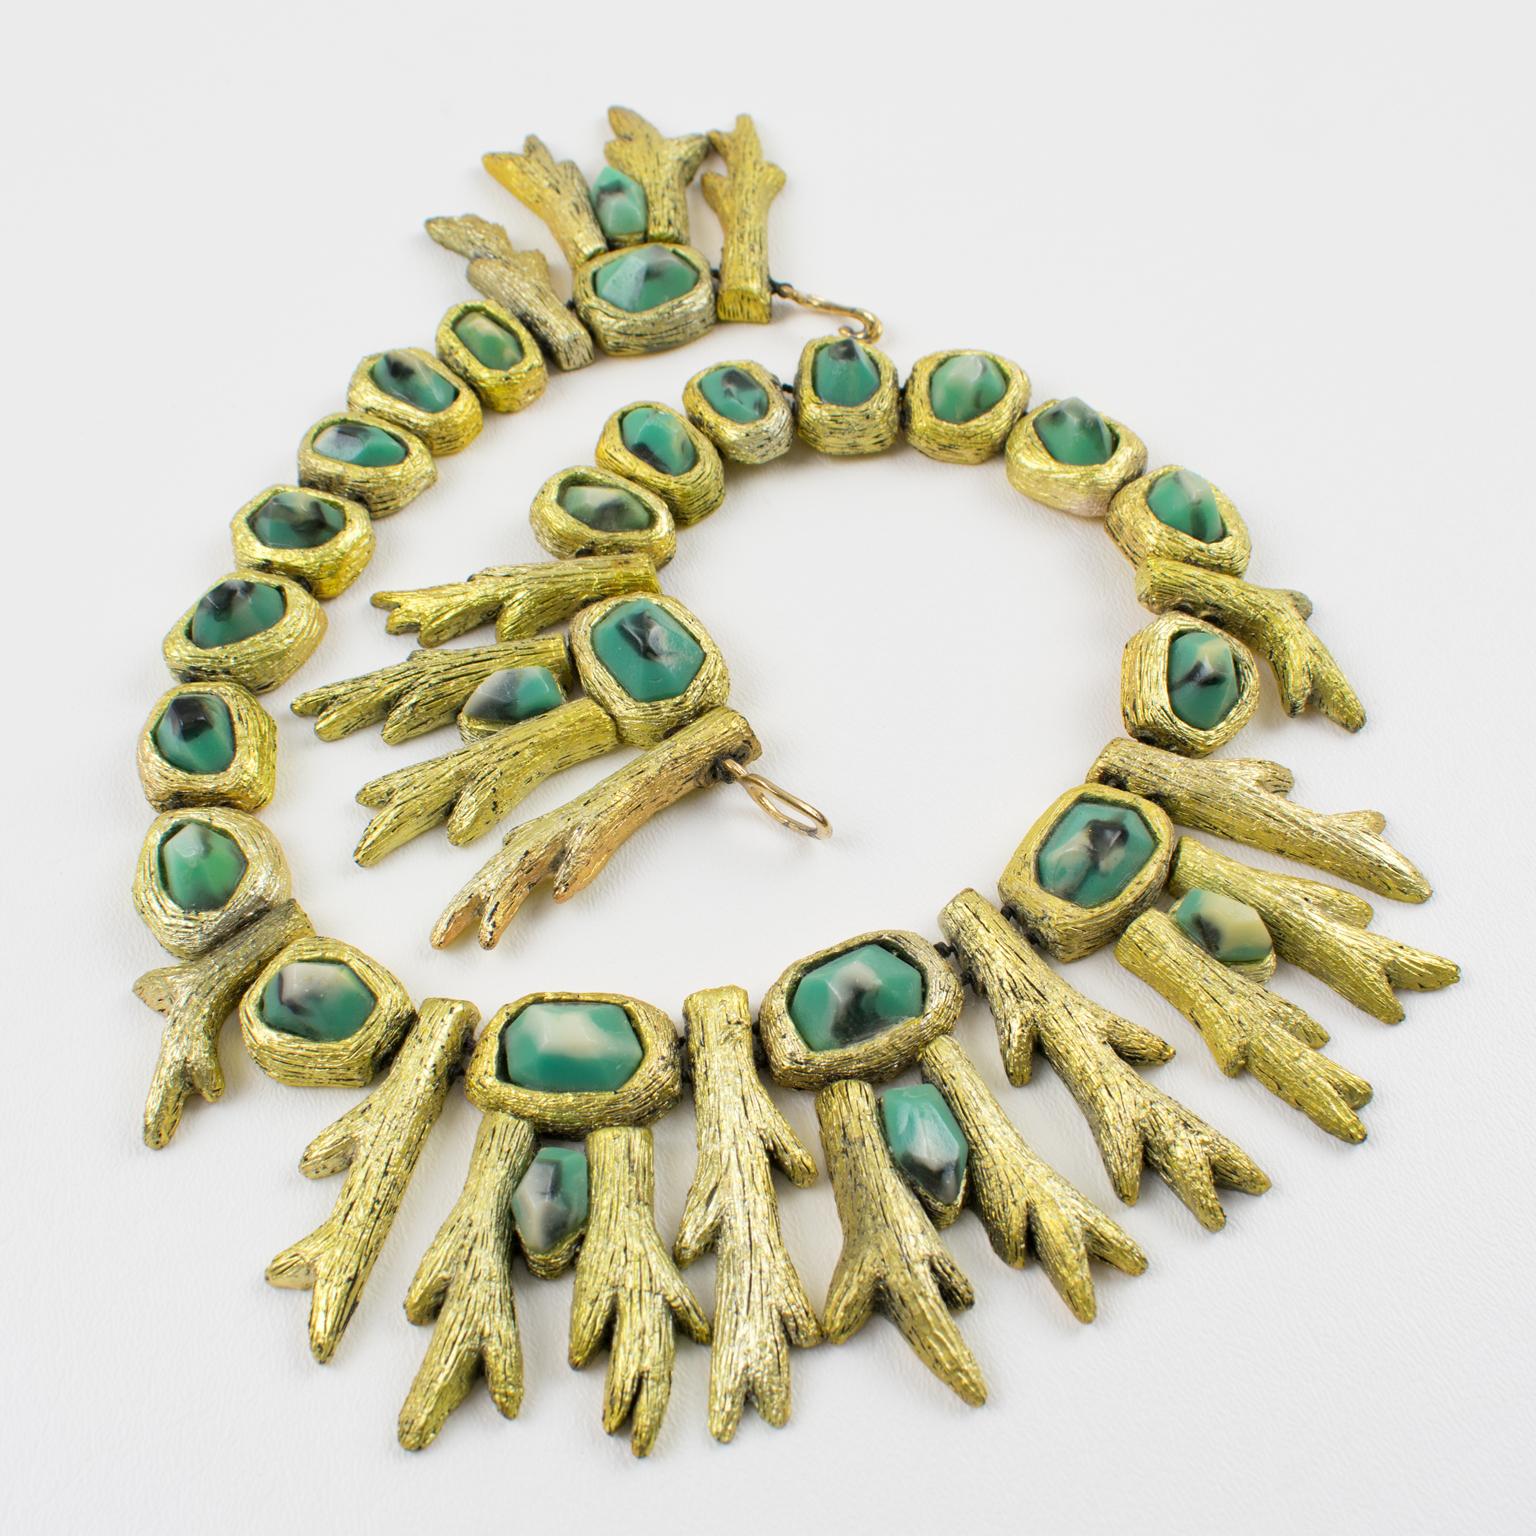 Mary Oros Sculptural Gilt Cast Resin Choker Necklace In Good Condition For Sale In Atlanta, GA